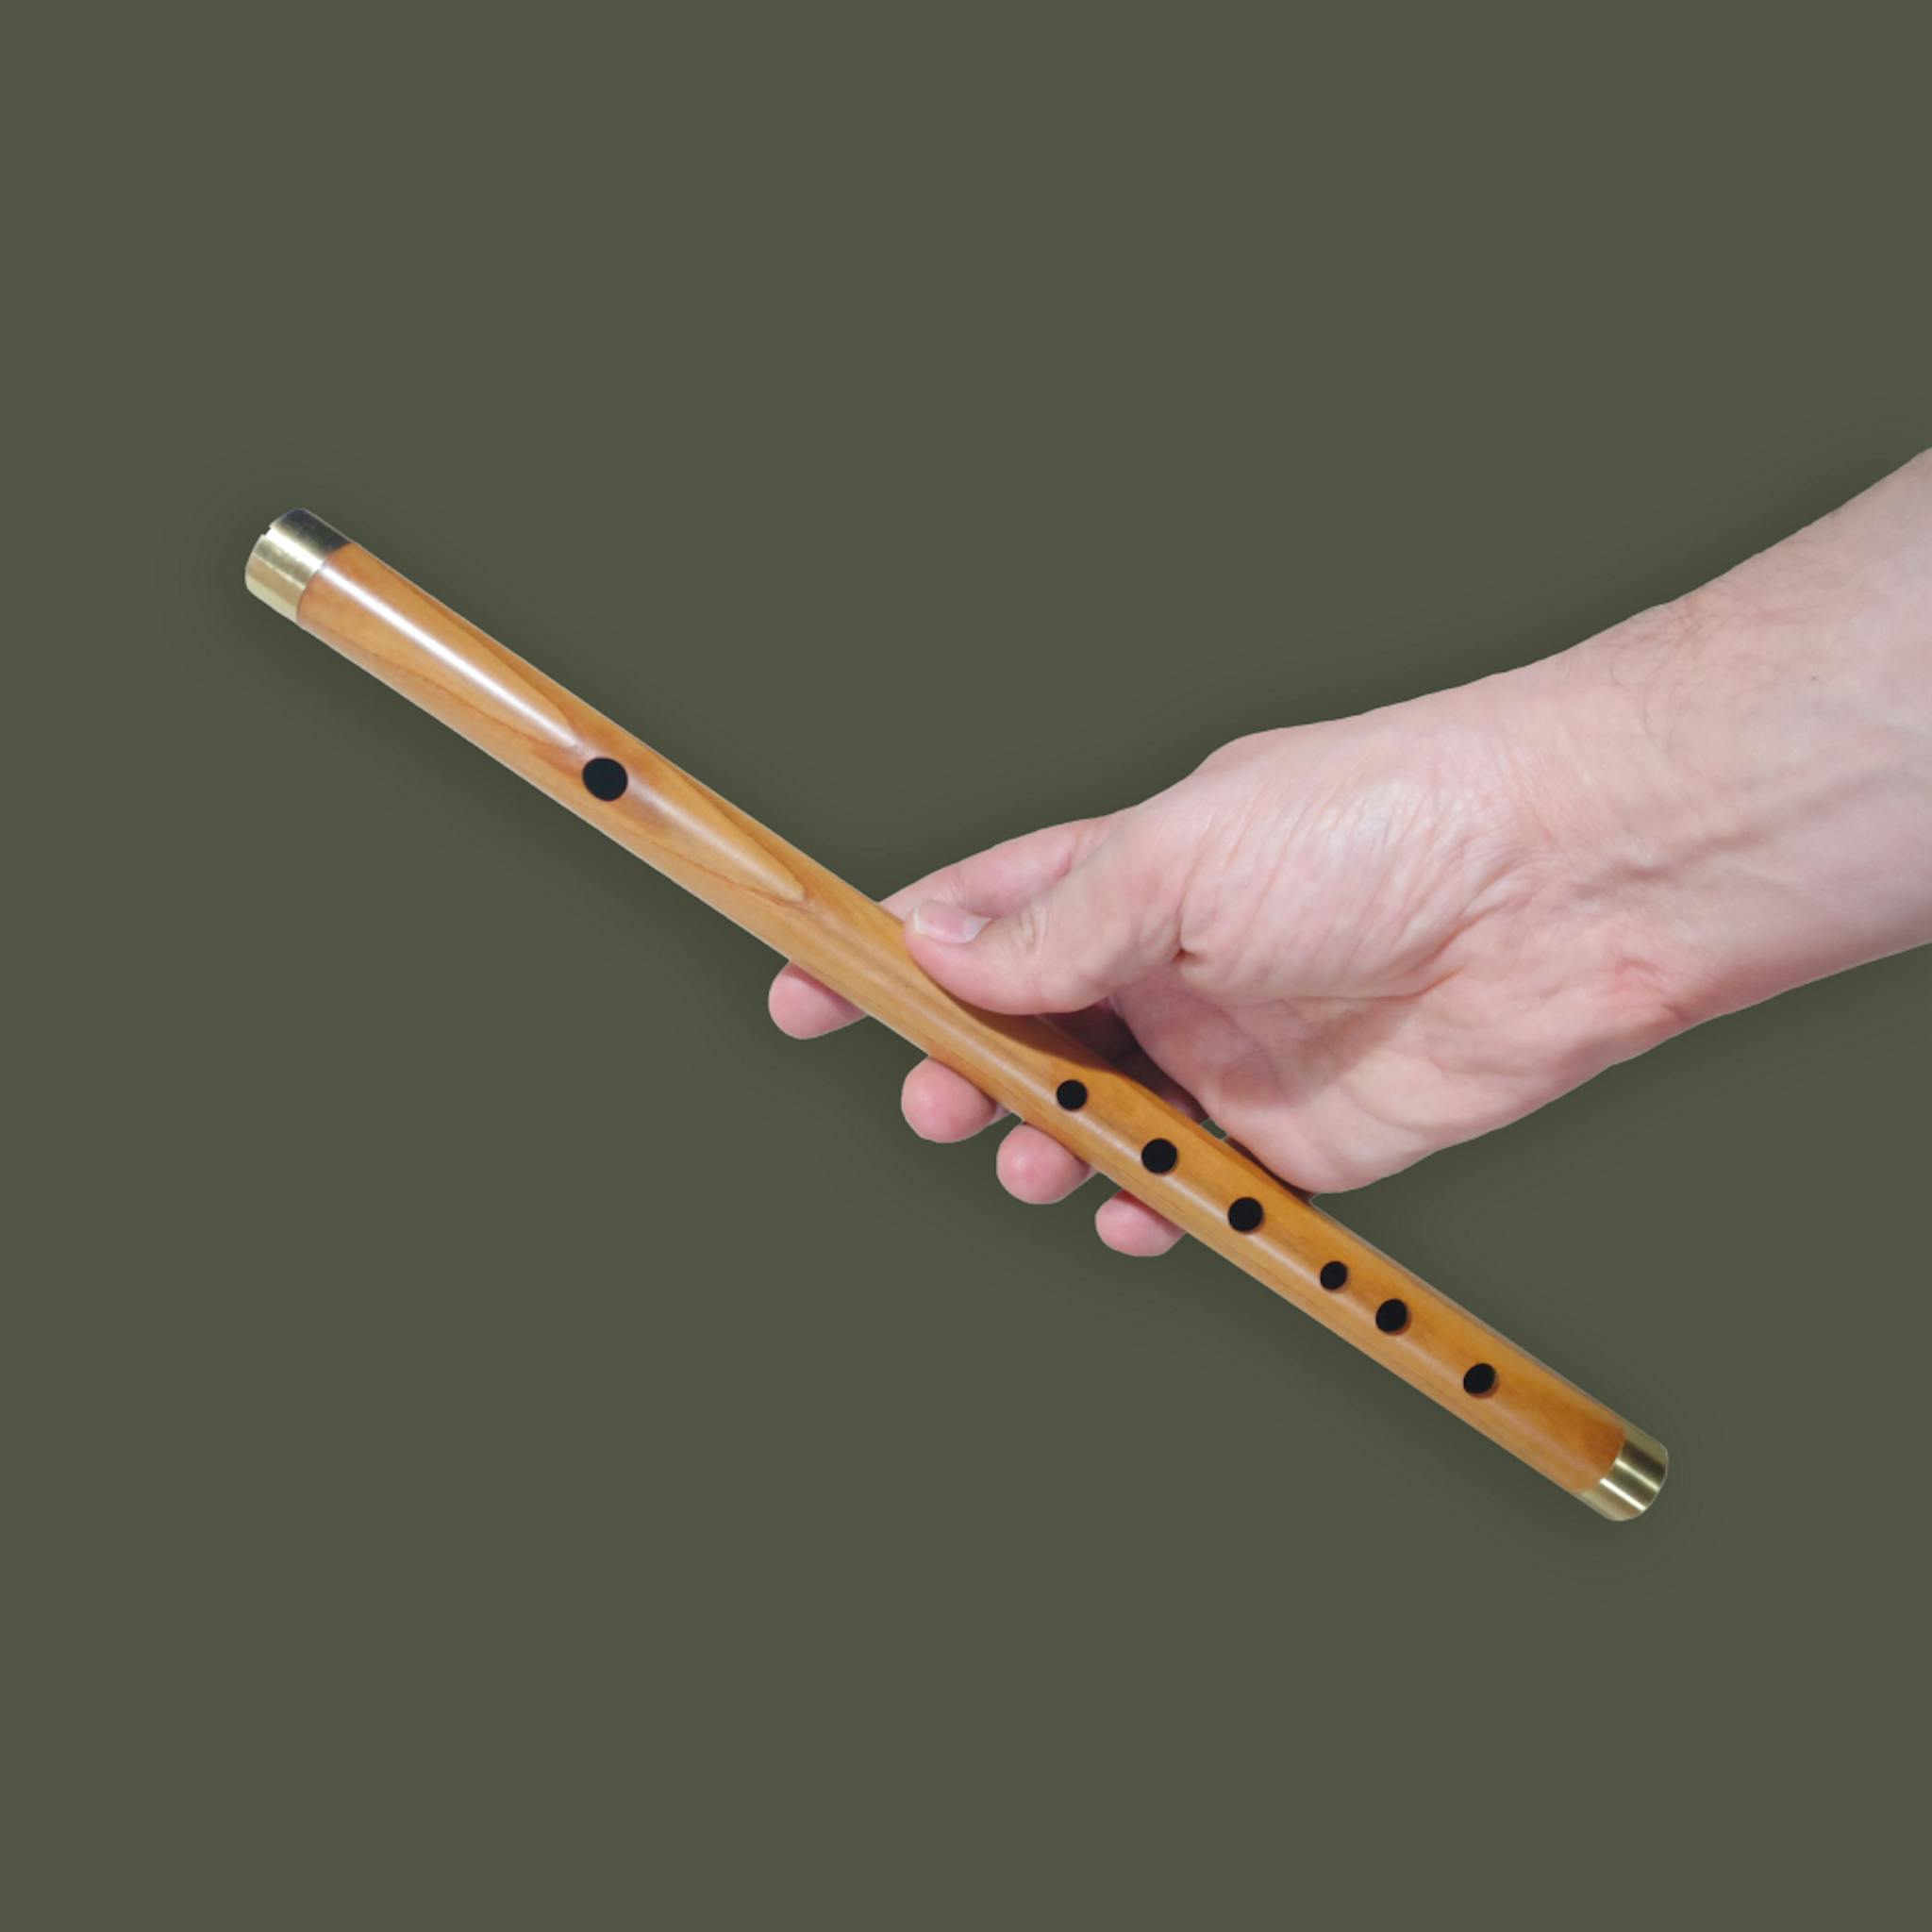 A wooden flute being held by a hand on a green backdrop.